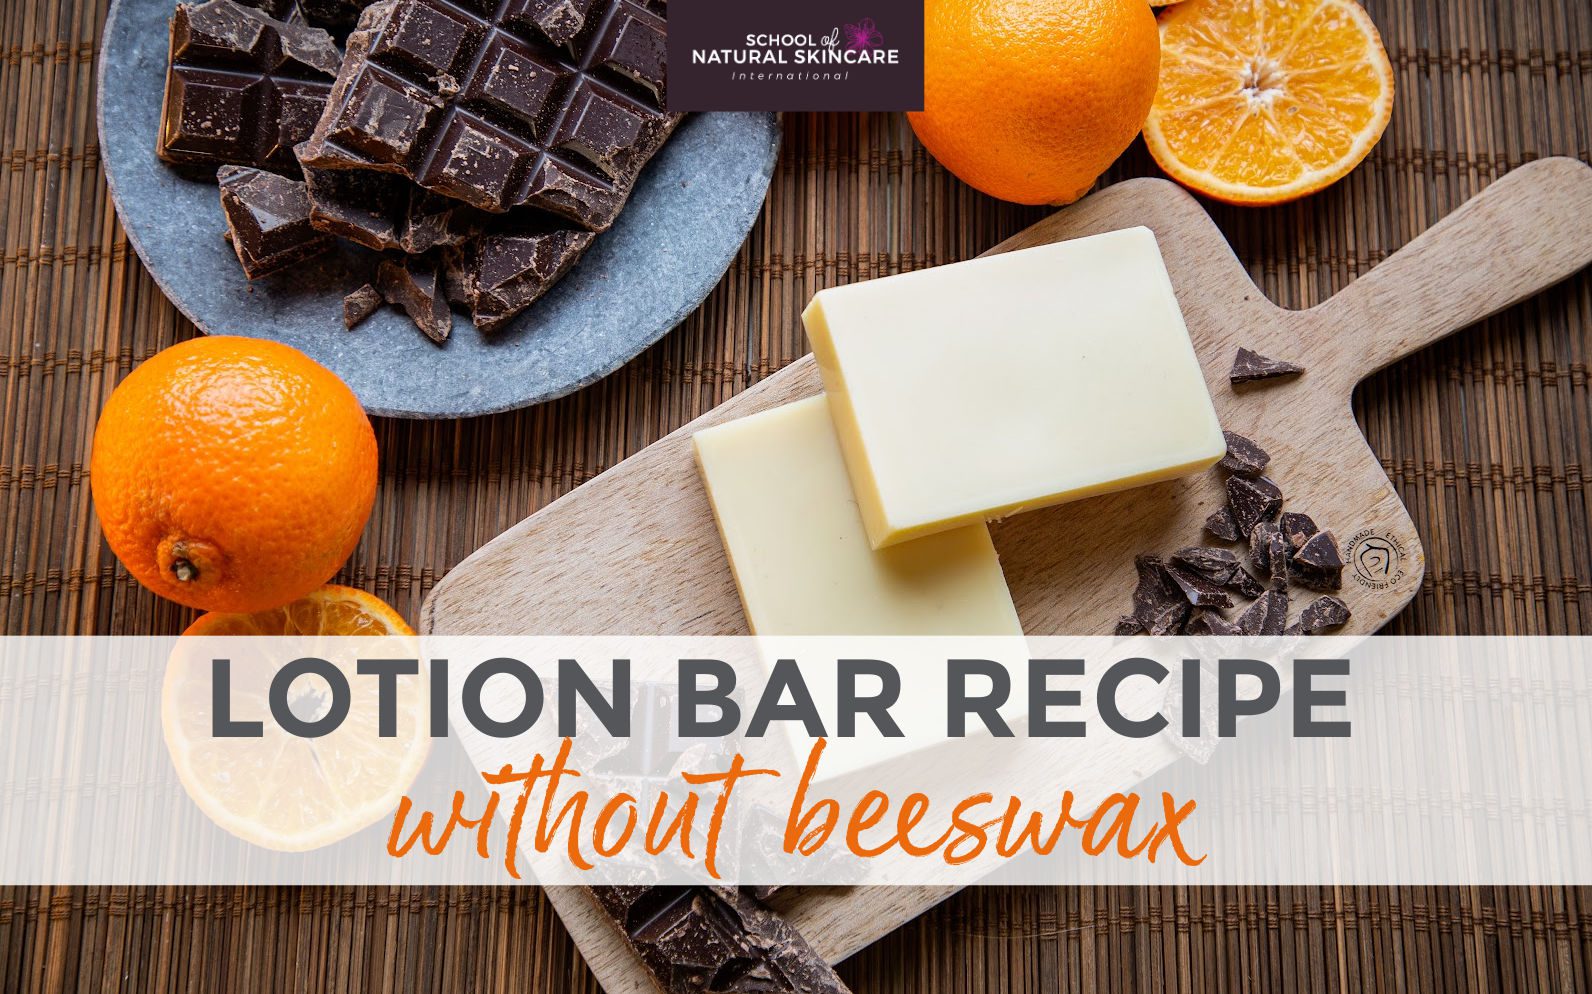 Easiest Lotion Bar Recipe with Beeswax (Non Greasy)